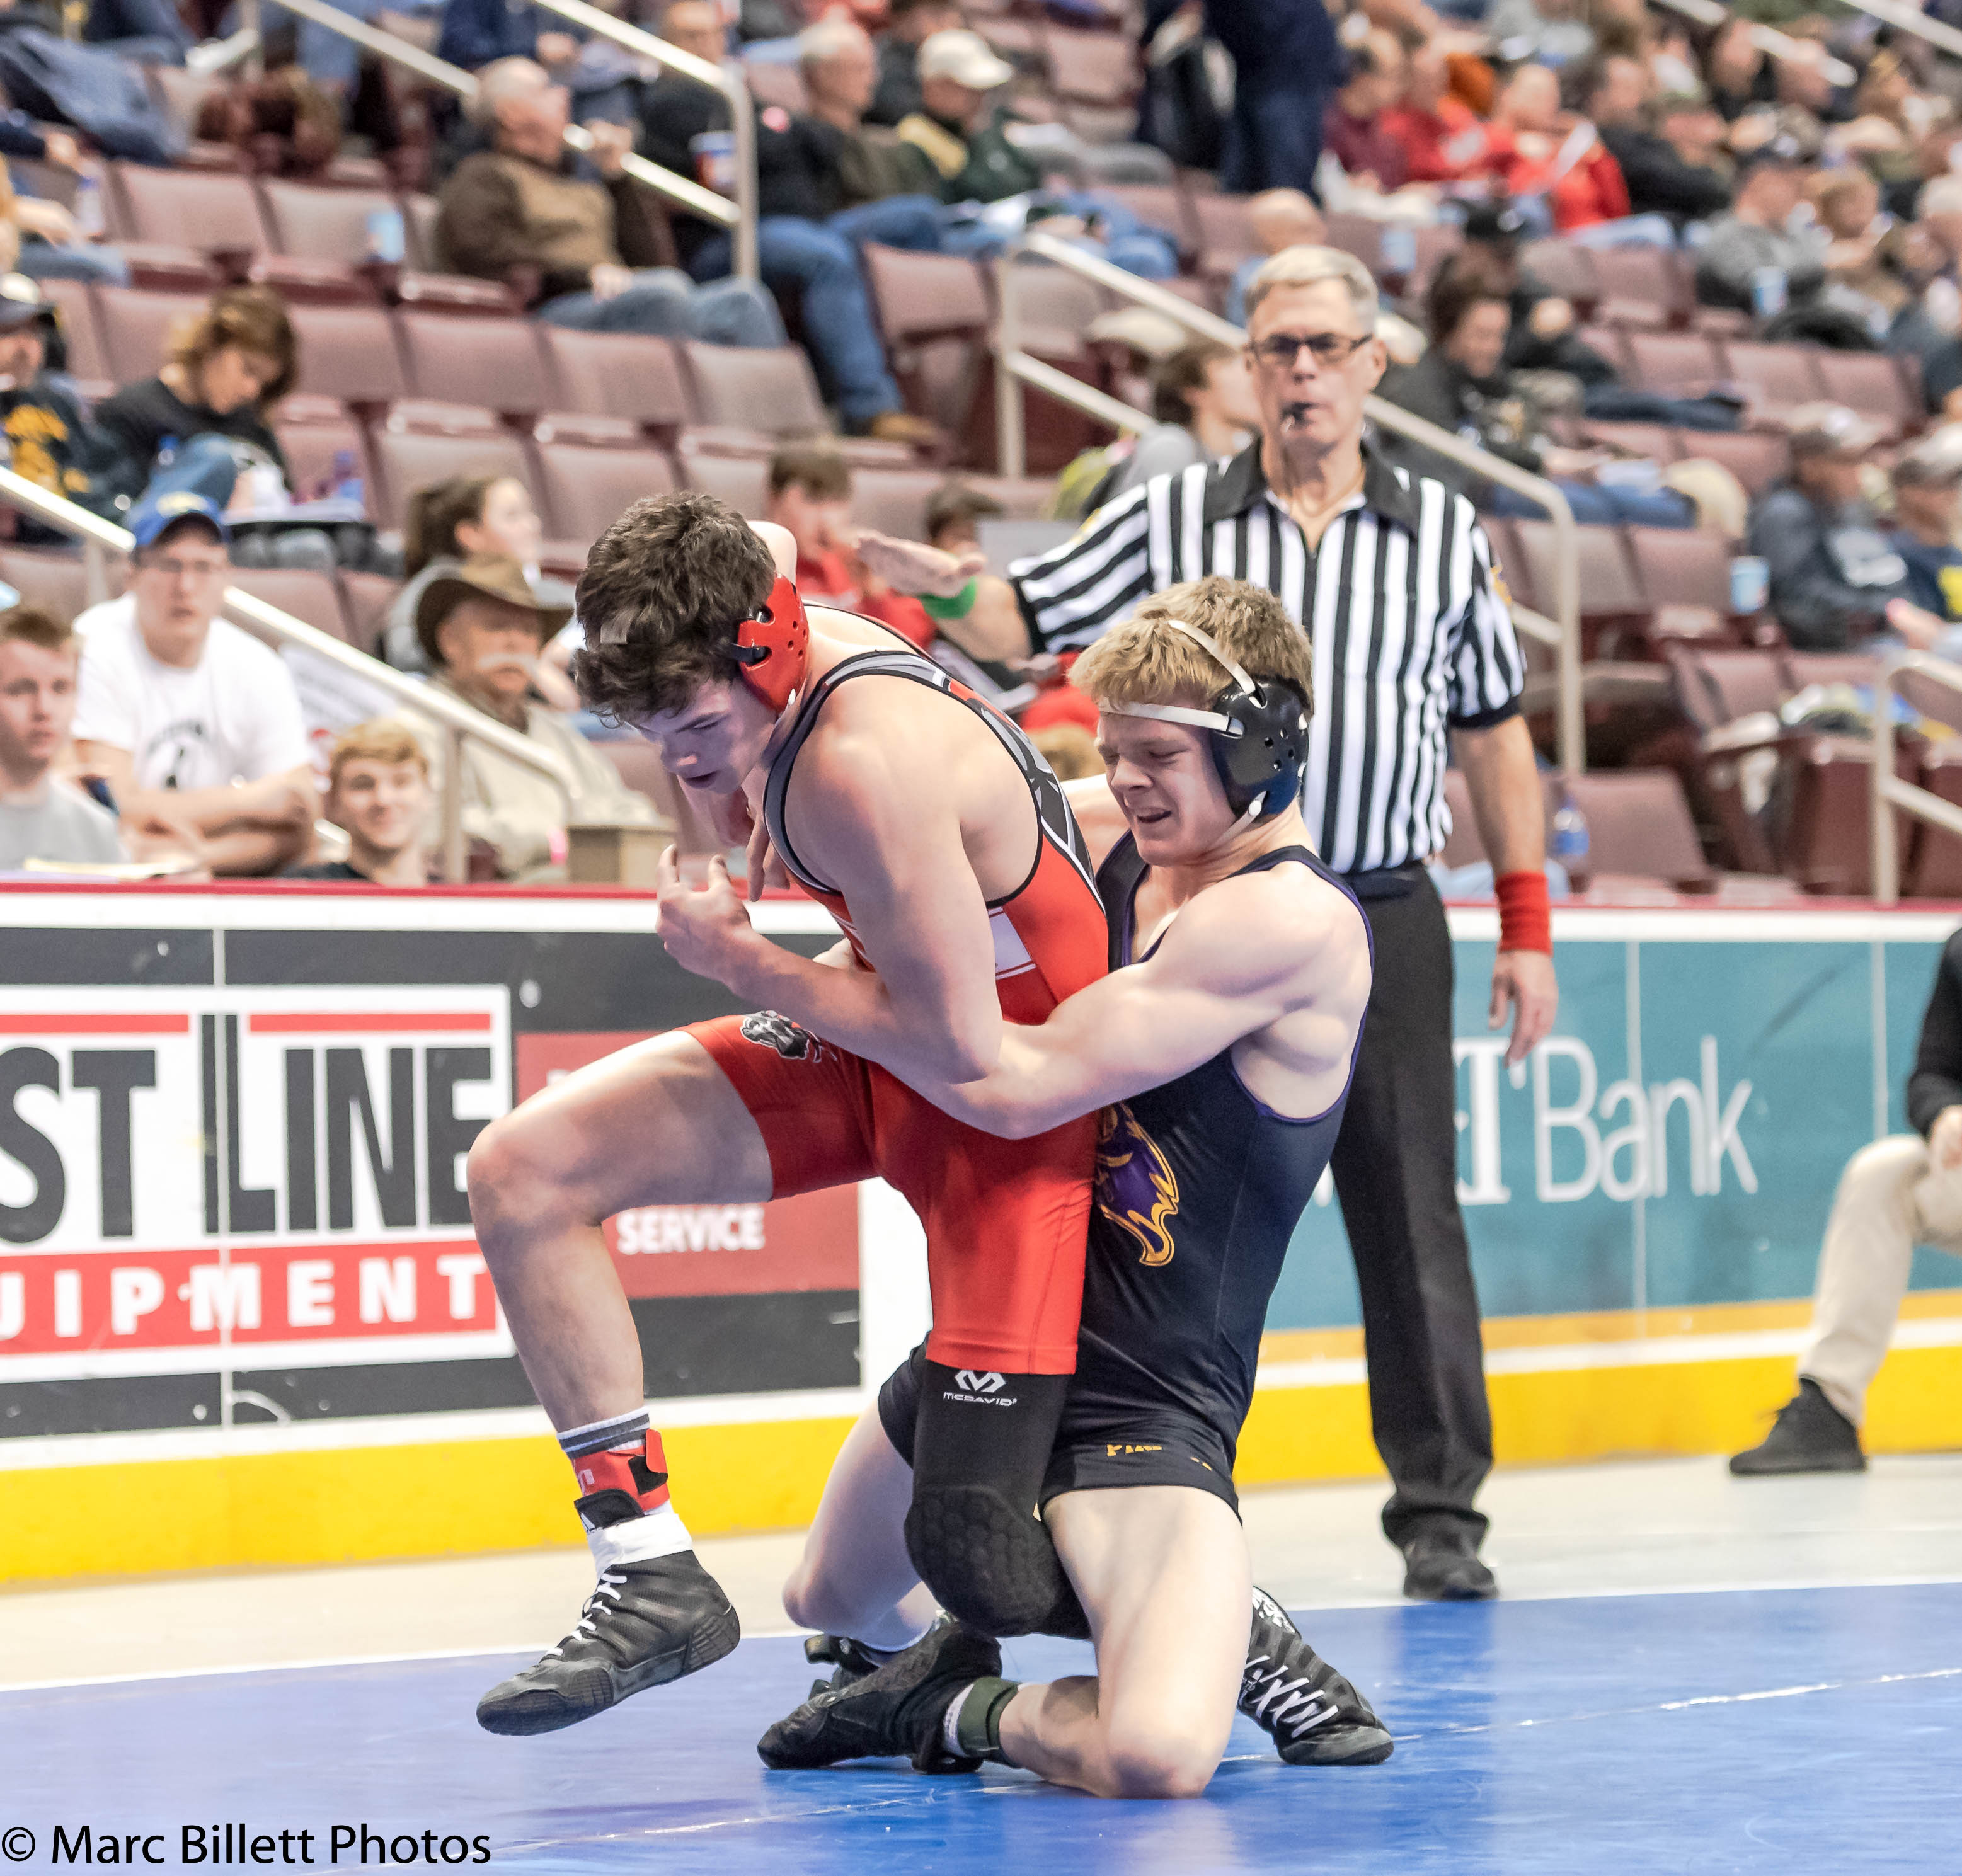 Ten Must See Class 2A Quarterfinals In The PIAA State Tournament on